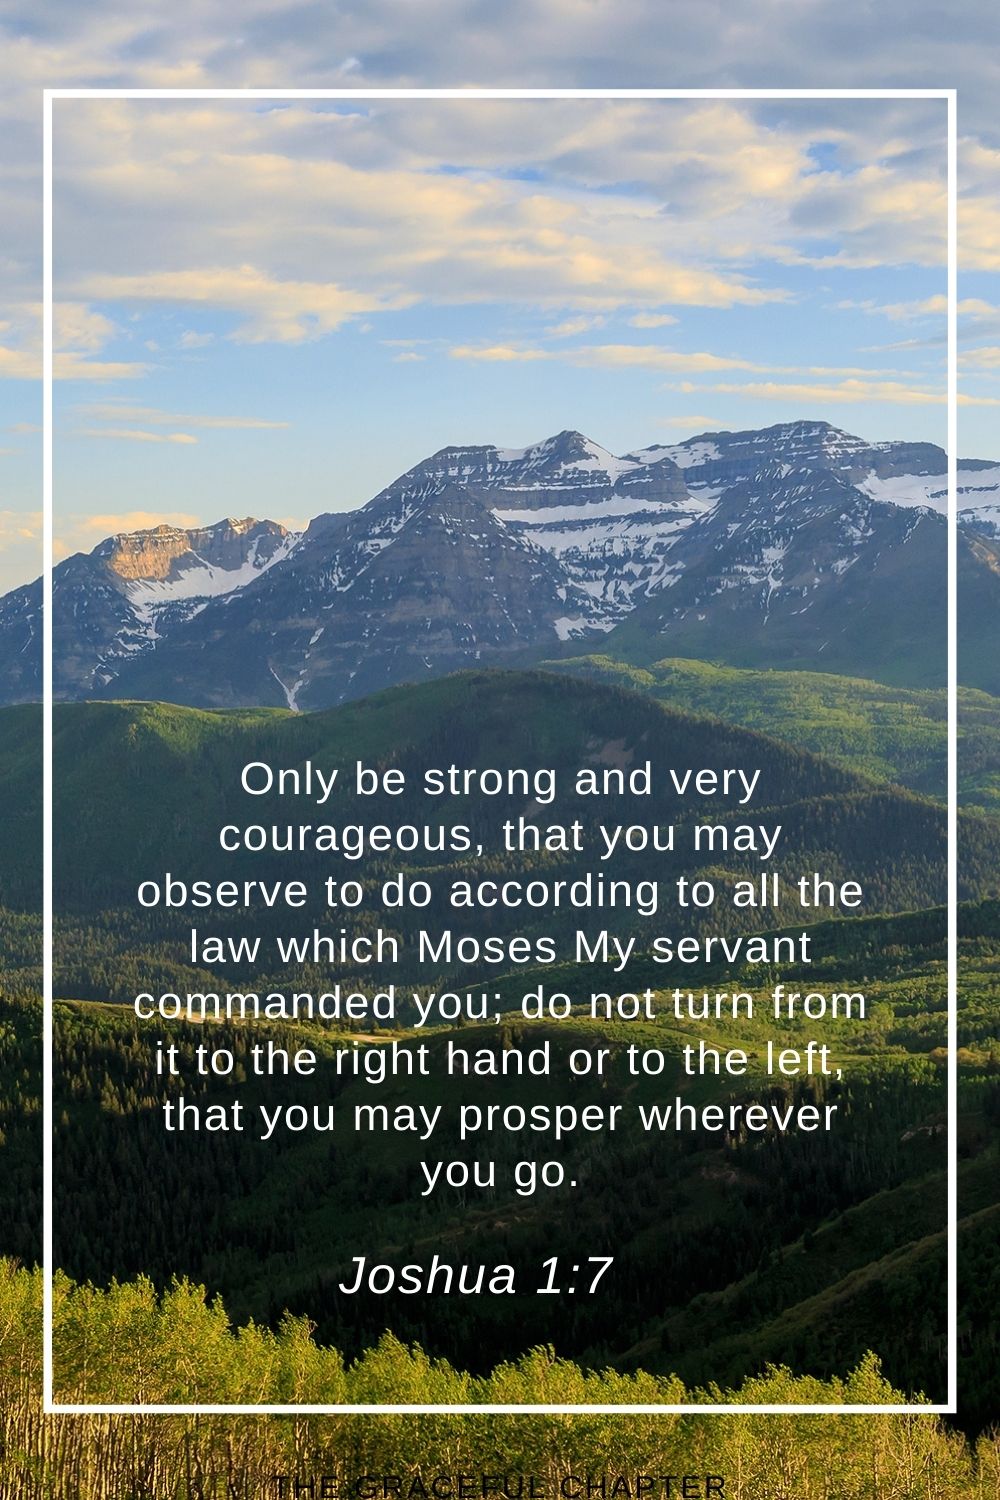 Only be strong and very courageous, that you may observe to do according to all the law which Moses My servant commanded you; do not turn from it to the right hand or to the left, that you may prosper wherever you go. Joshua 1:7